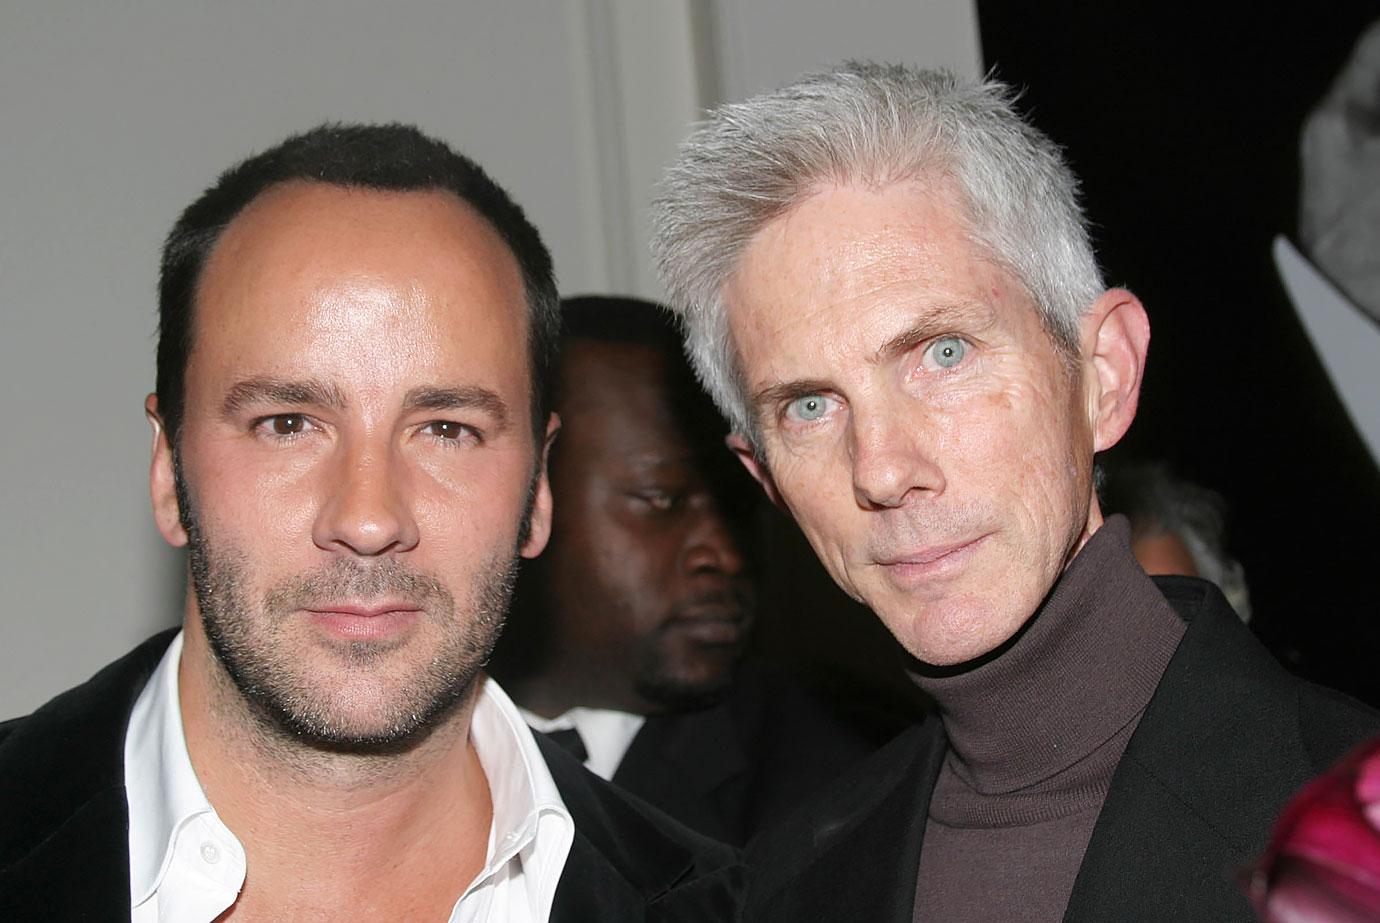 Richard Buckley, Journalist and Tom Ford's Husband, Has Died